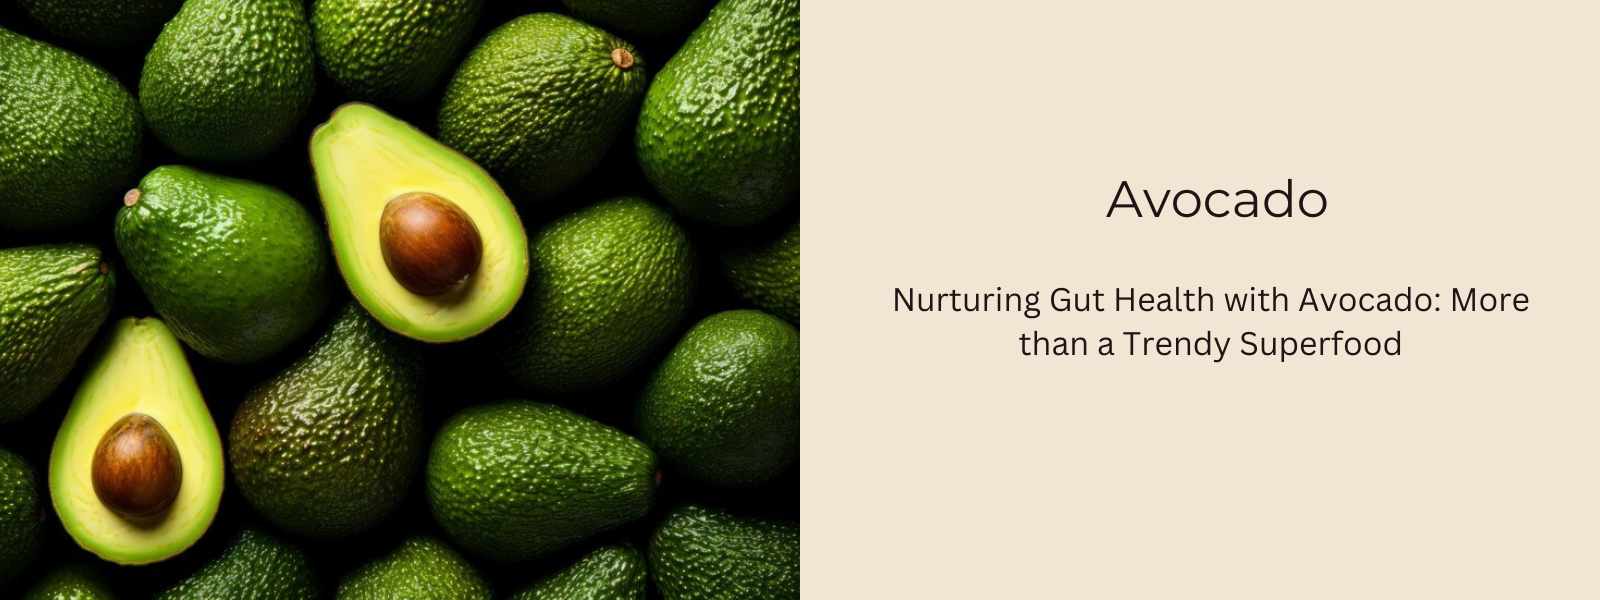 Nurturing Gut Health with Avocado: More than a Trendy Superfood